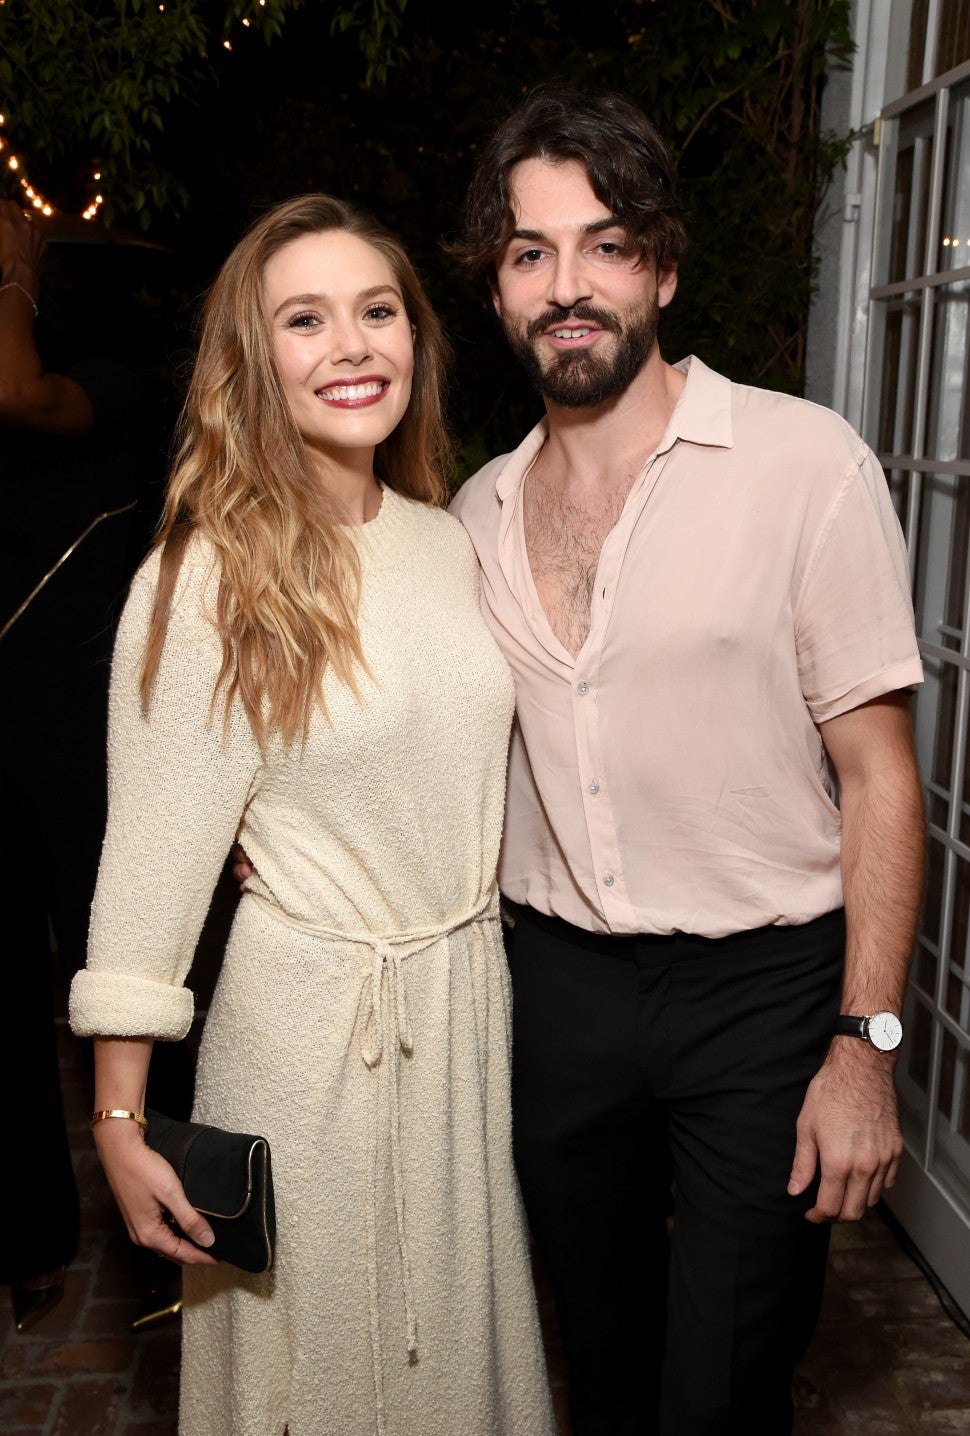 Elizabeth Olsen (L) and Robbie Arnett attend the 2017 Gersh Emmy Party presented by Tequila Don Julio 1942 on September 15, 2017 in Los Angeles, California. 